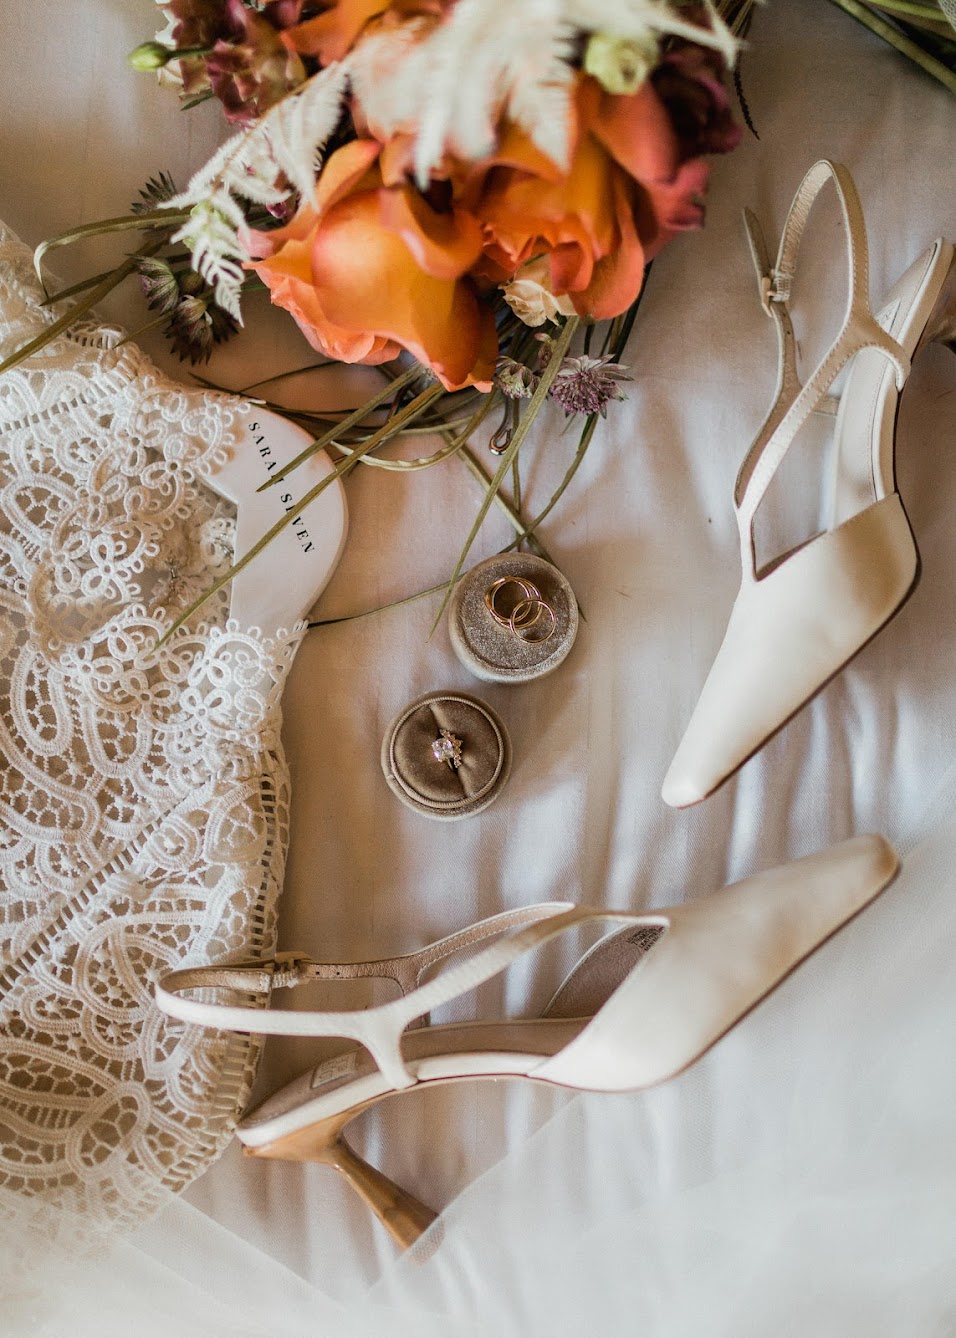 A detailed shot of the bridal accessories including closed-toed heels, diamond wedding ring along with gold wedding bands, colorful florals and a portion of the wedding dress. 